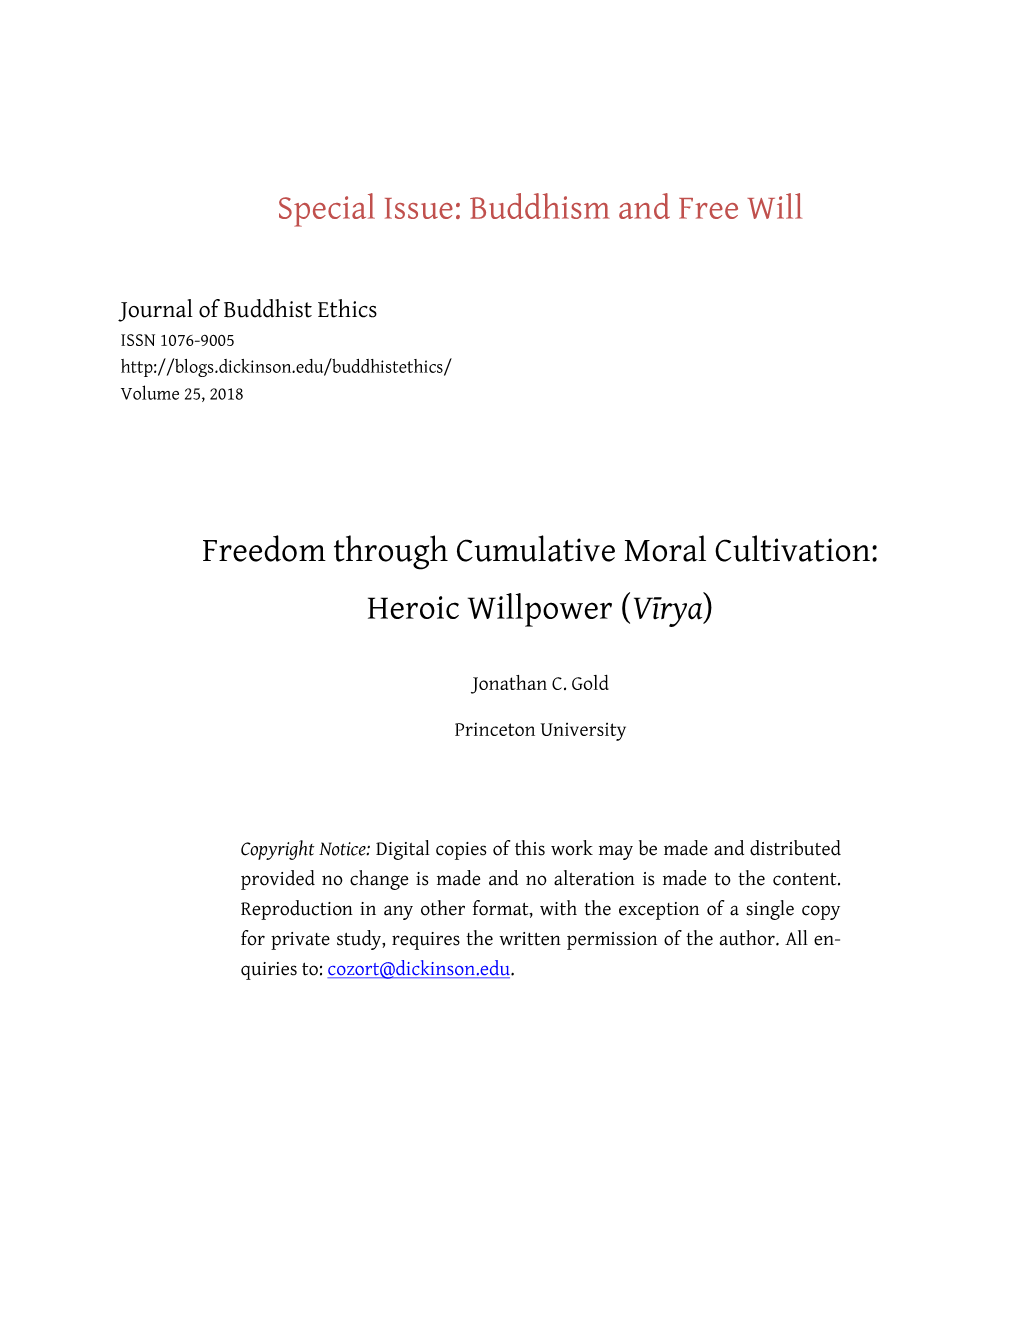 Buddhism and Free Will Freedom Through Cumulative Moral Cultivation